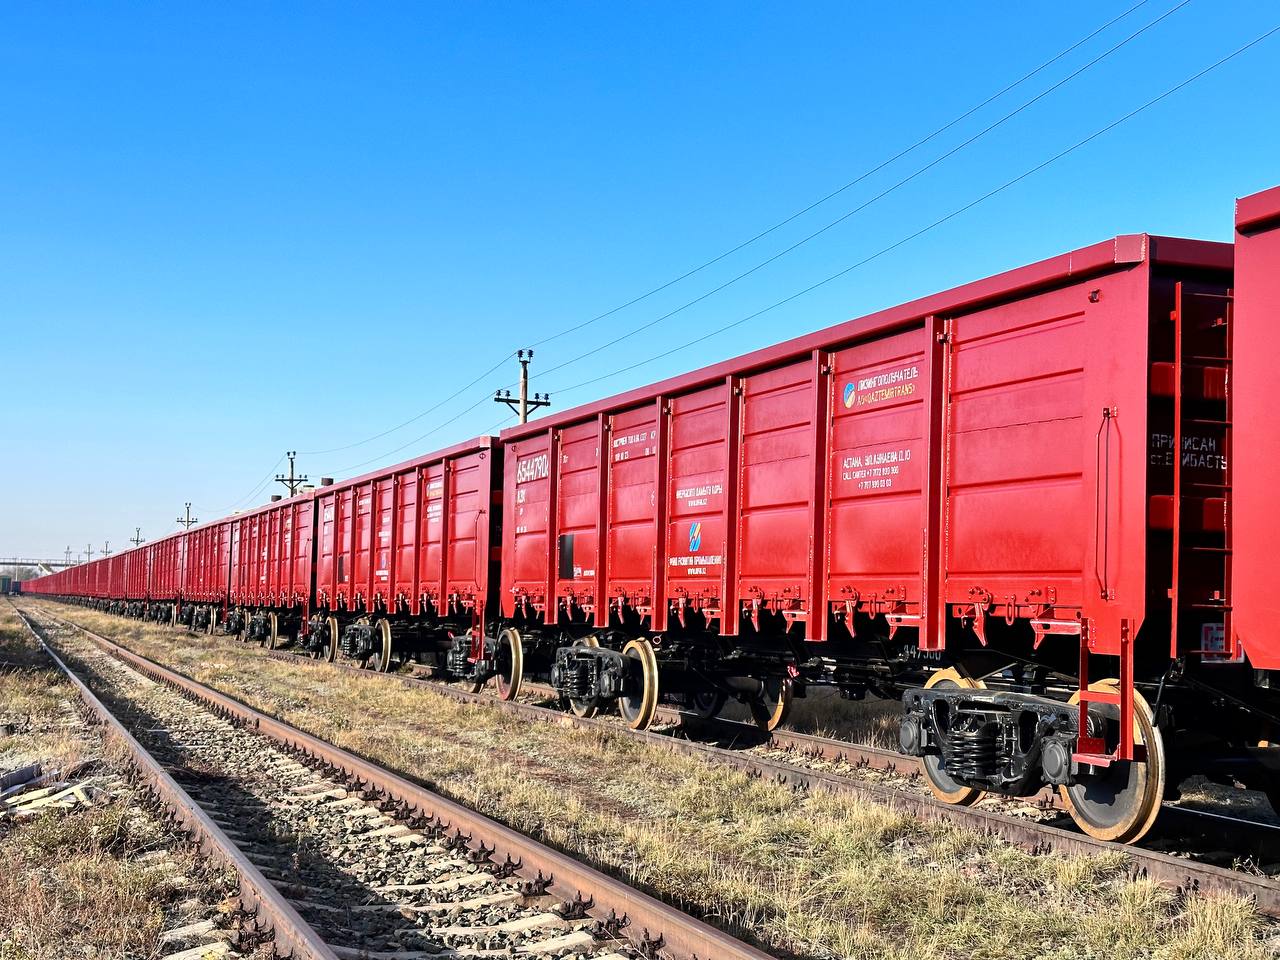 Kaztemirtrans JSC summed up the results of the repair of freight cars